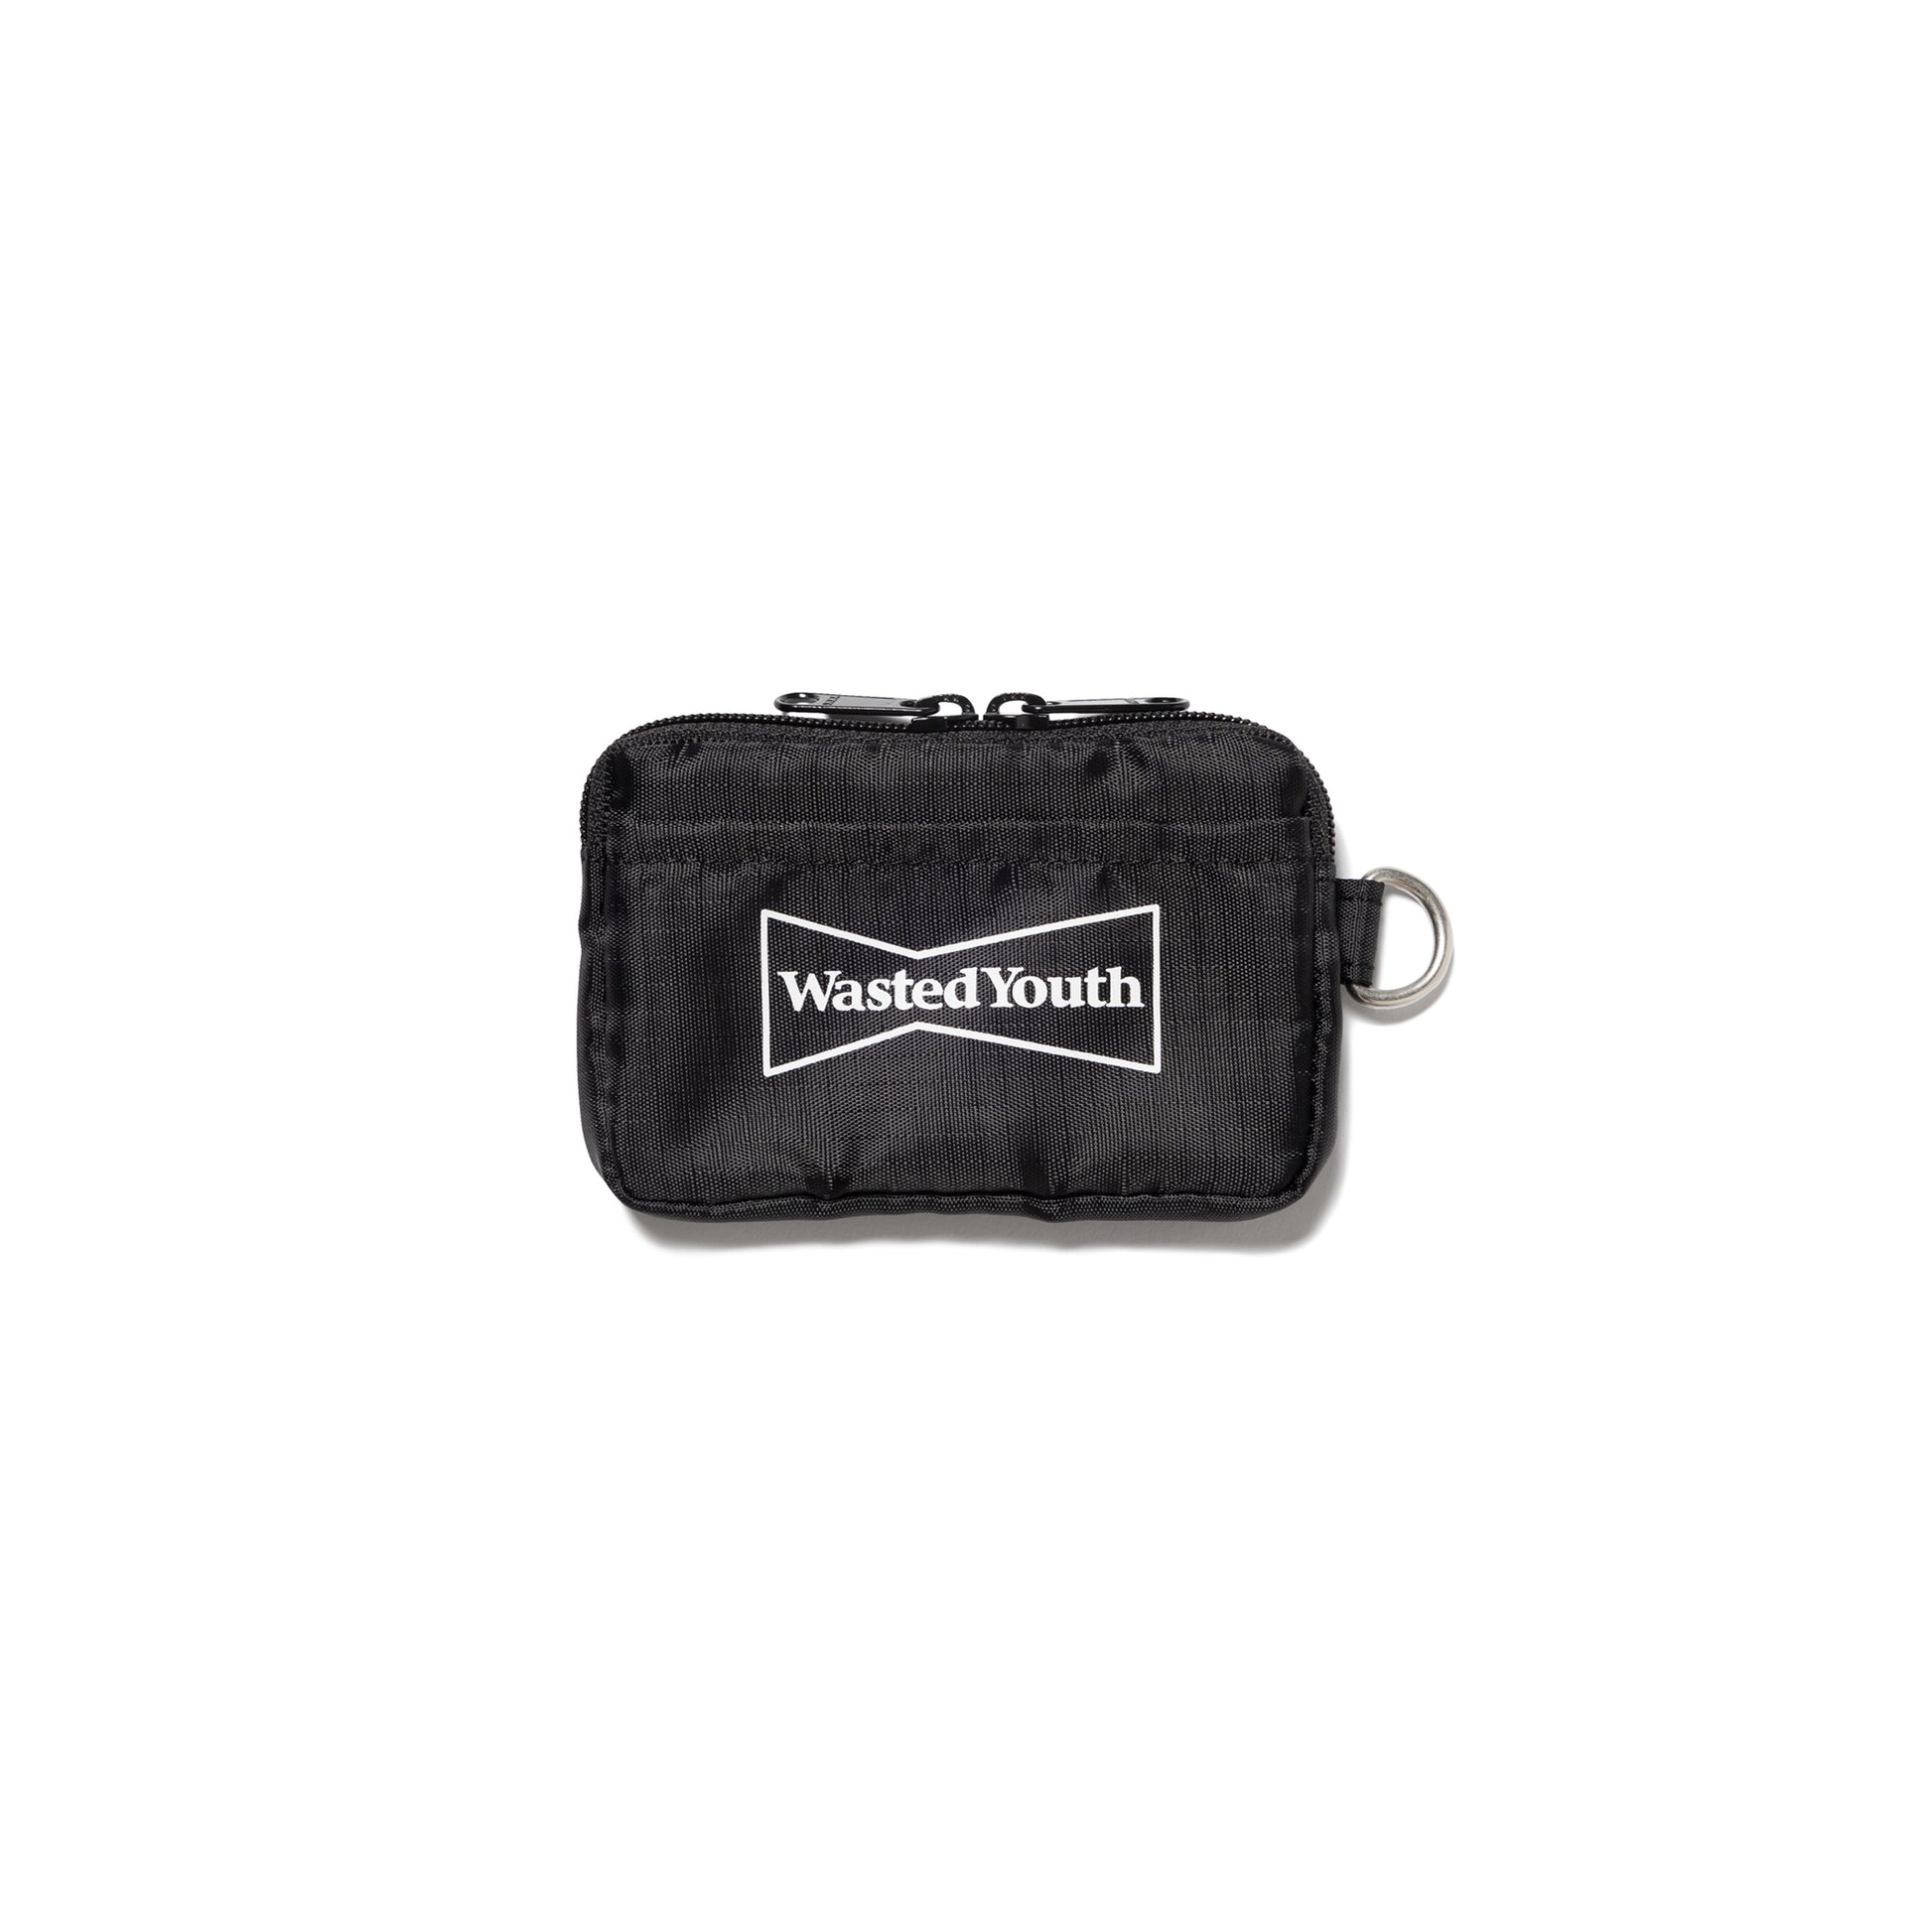 Wasted youth TRAVEL CASE MINI BK-A